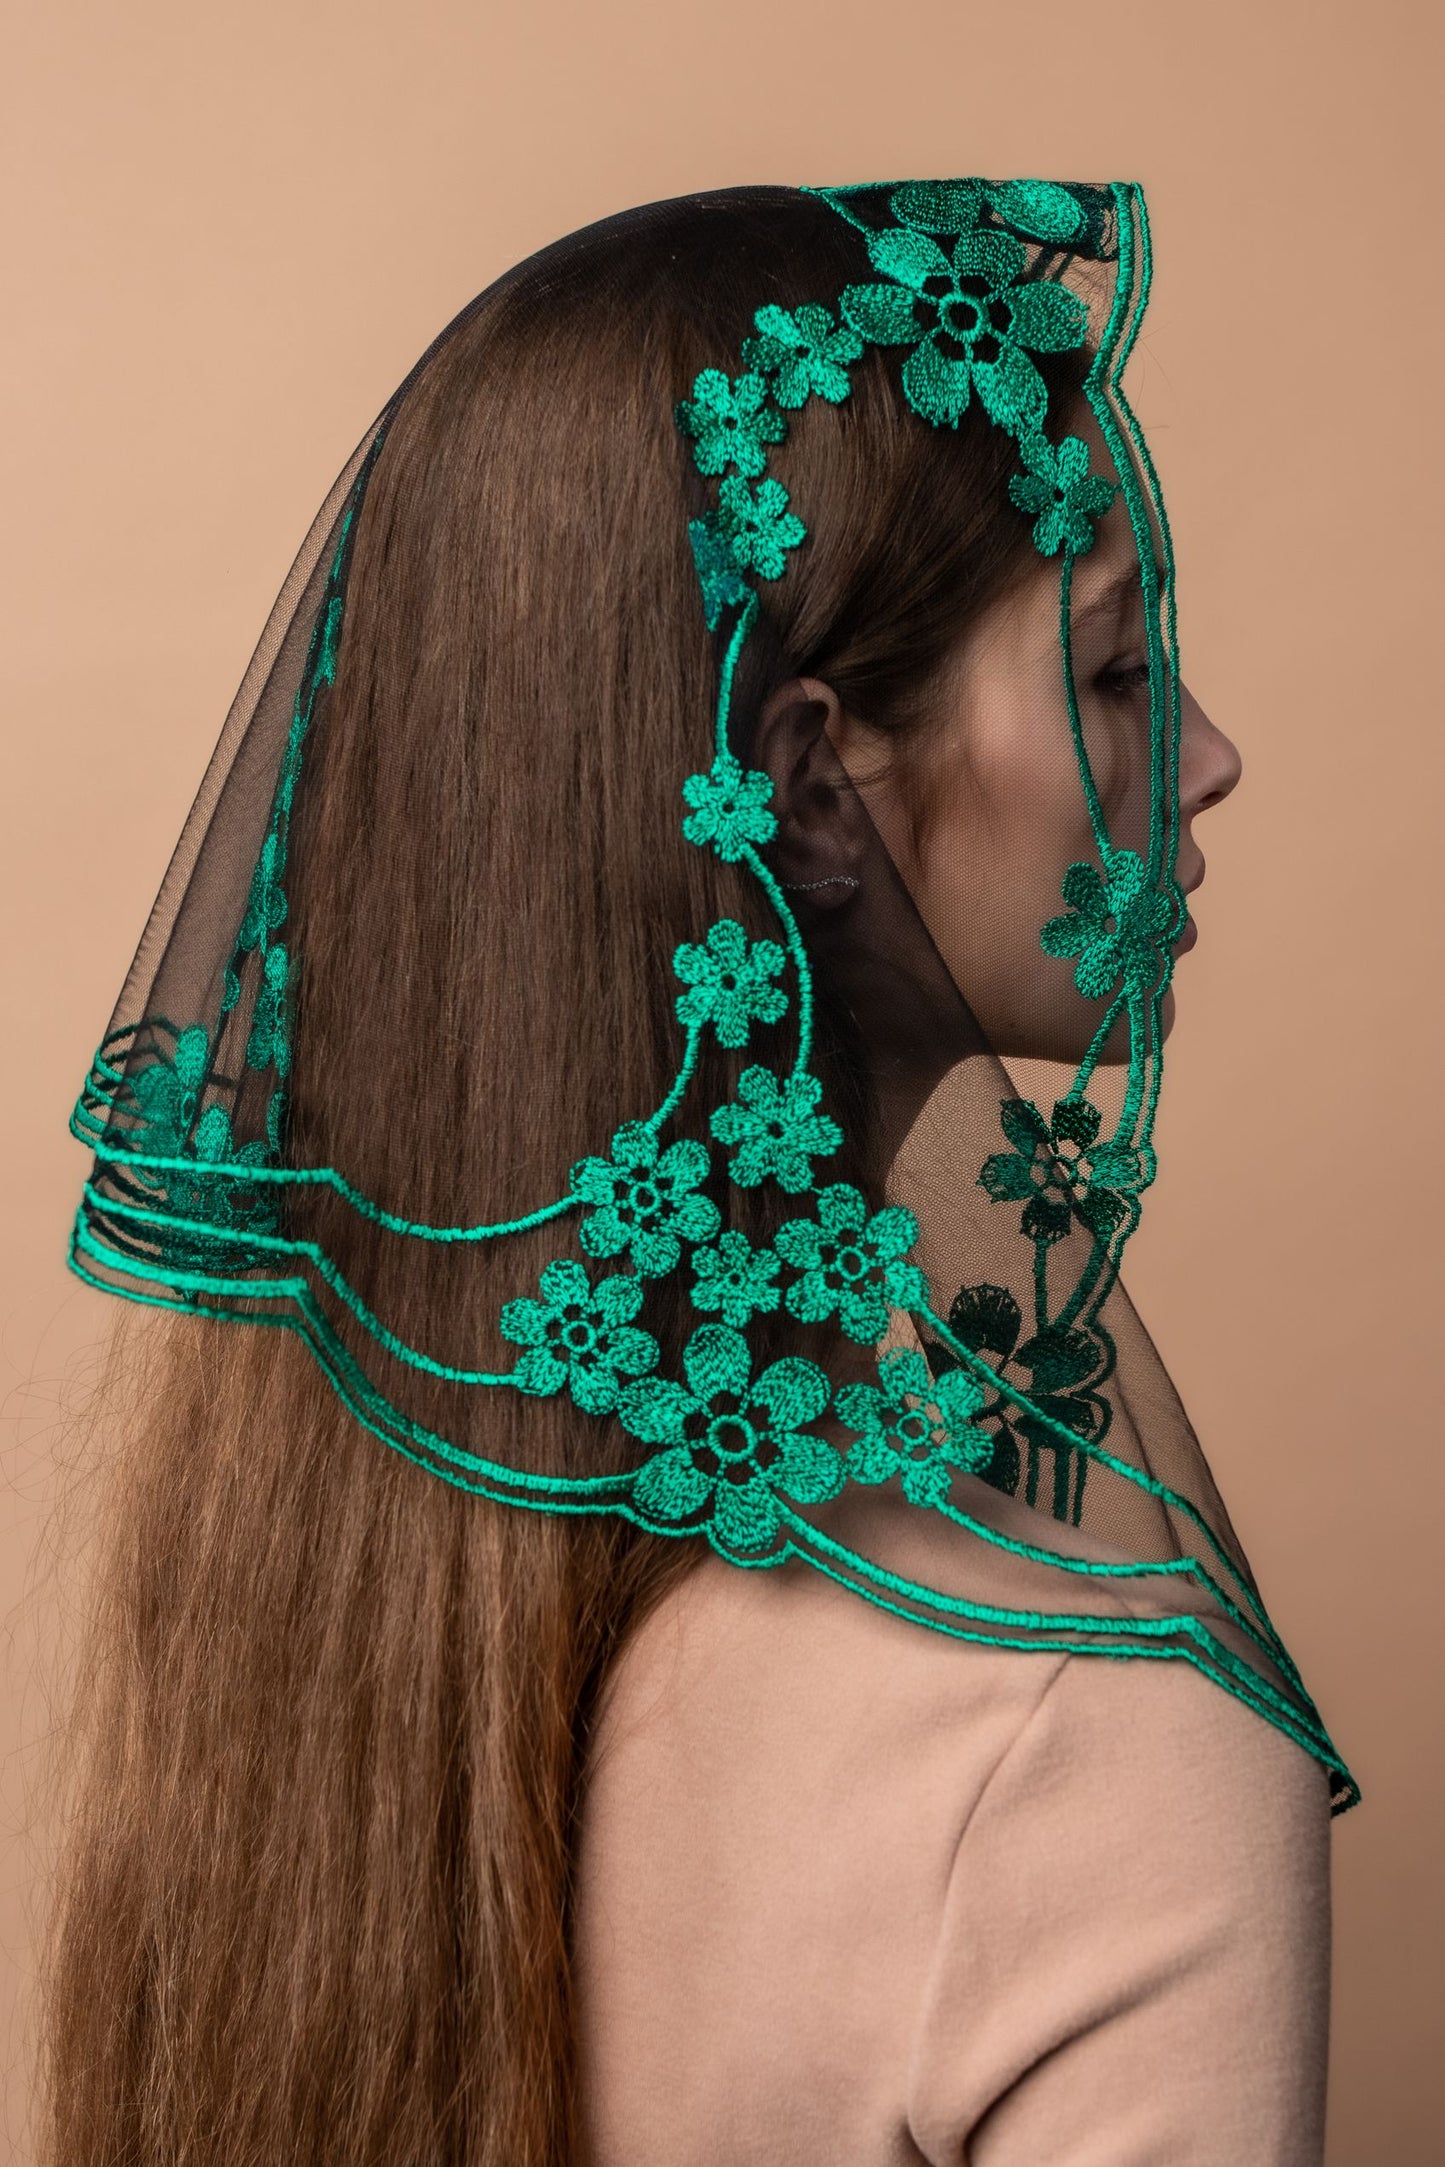 NEW COLOR Bestseller! Green lace veil - MariaVeils